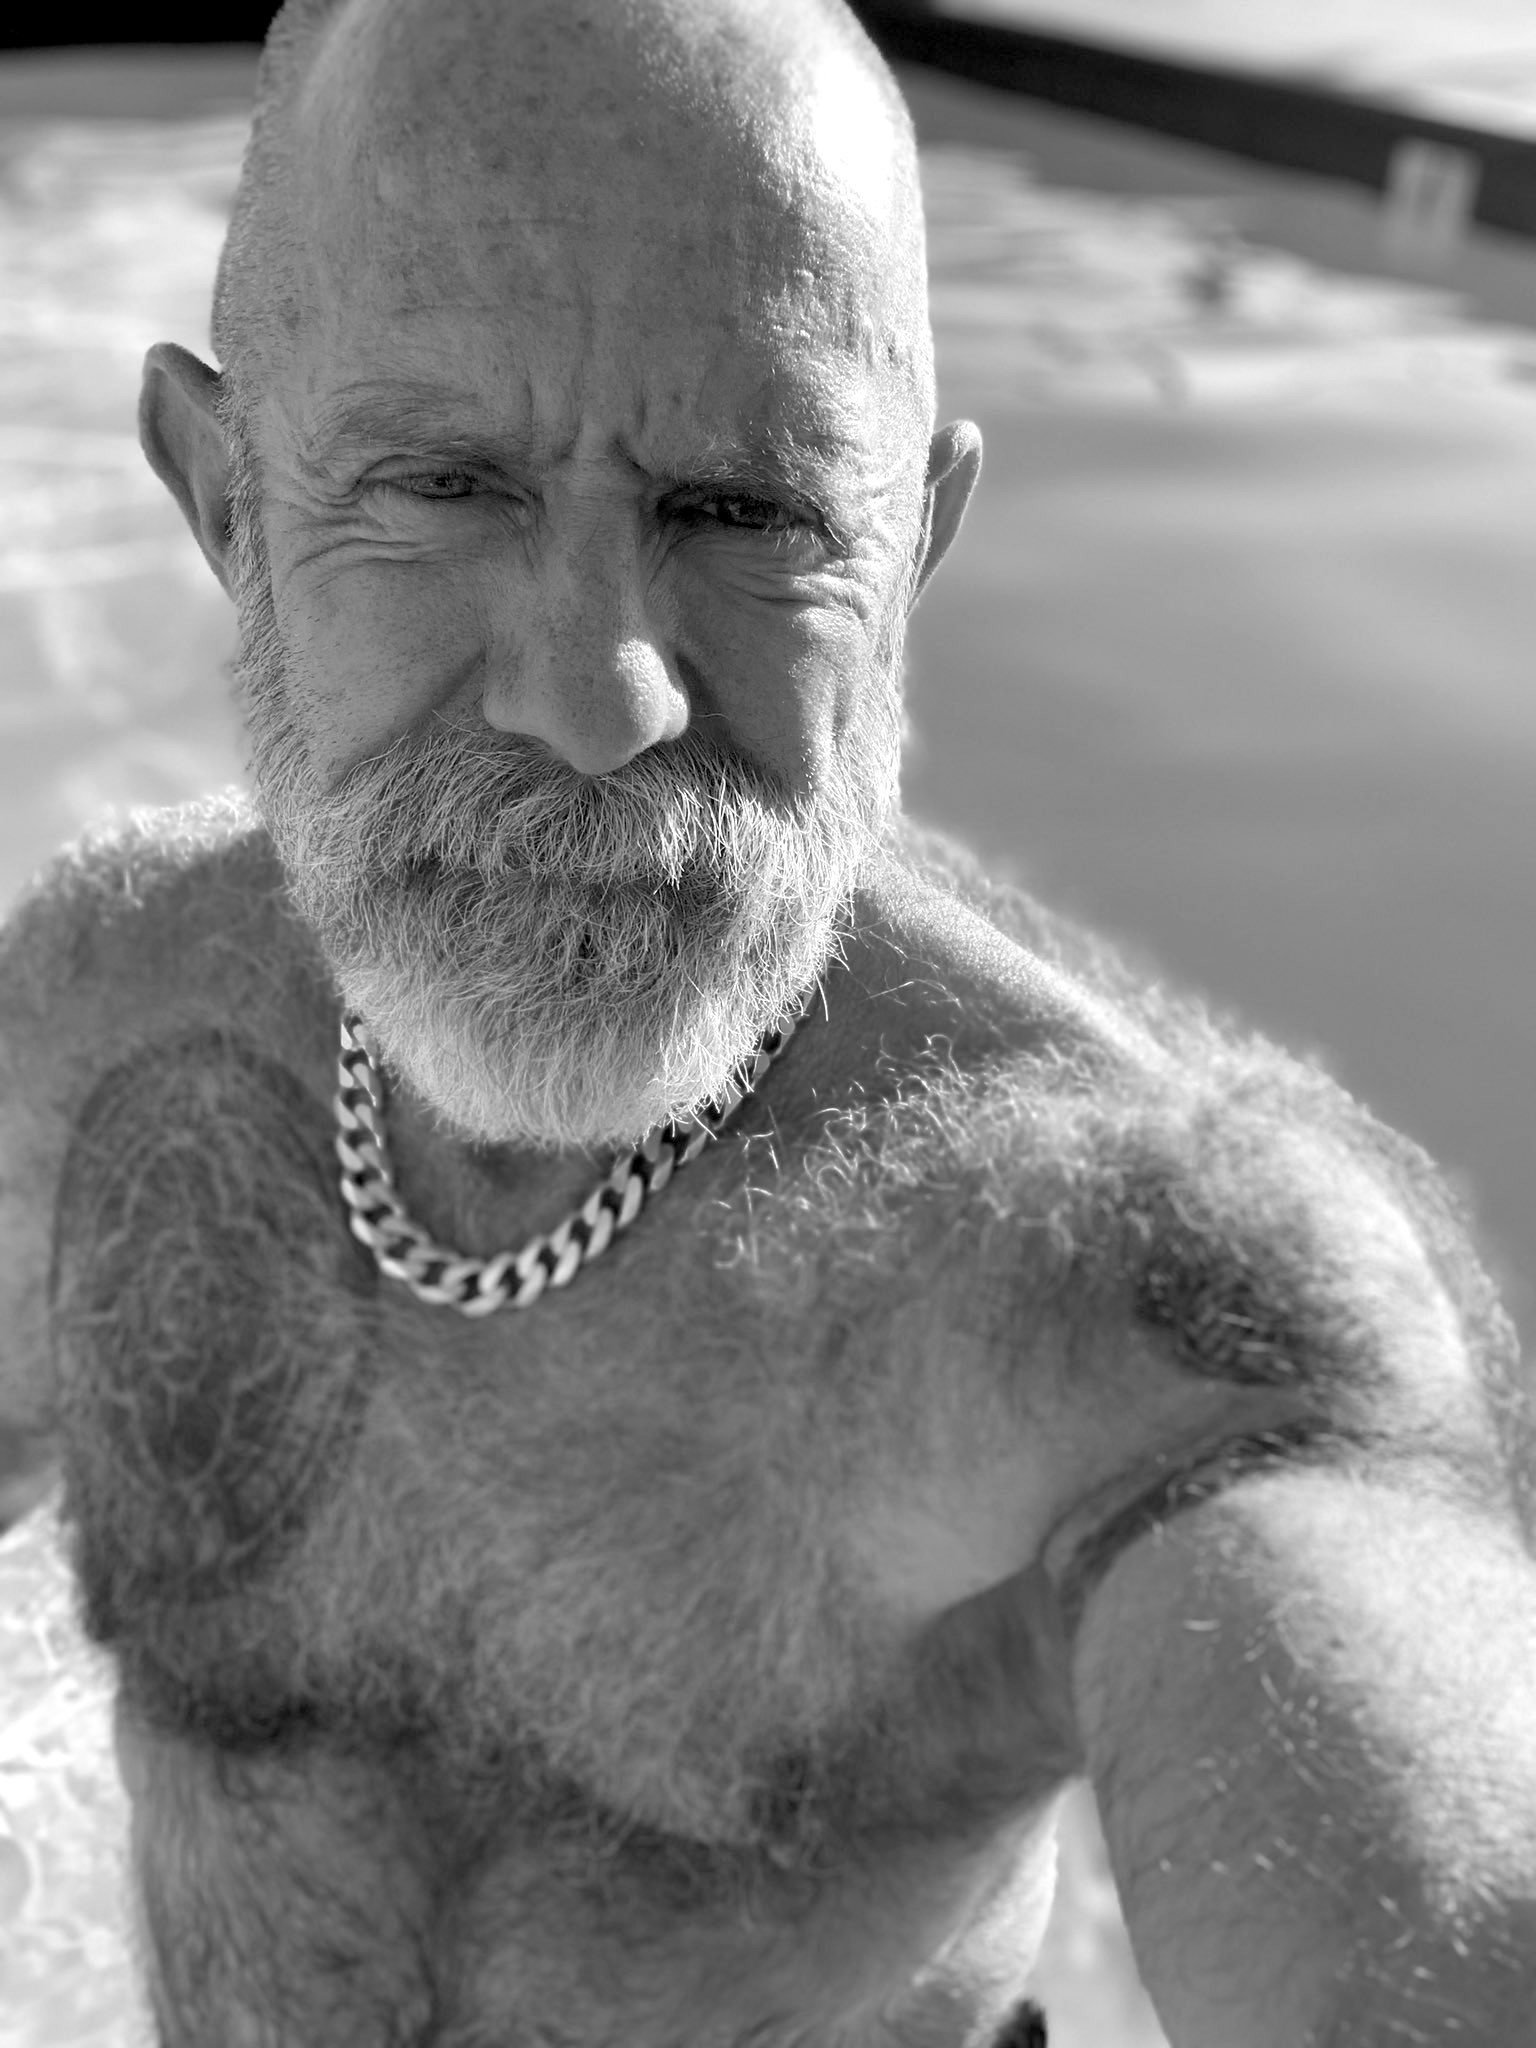 Photo by DirtyDaddyFunStuff with the username @DirtyDaddyPorn, who is a verified user,  April 28, 2024 at 6:51 PM and the text says '#hairy 10 #gingers #armpits #stubble #daddies #manly #furry #beards'